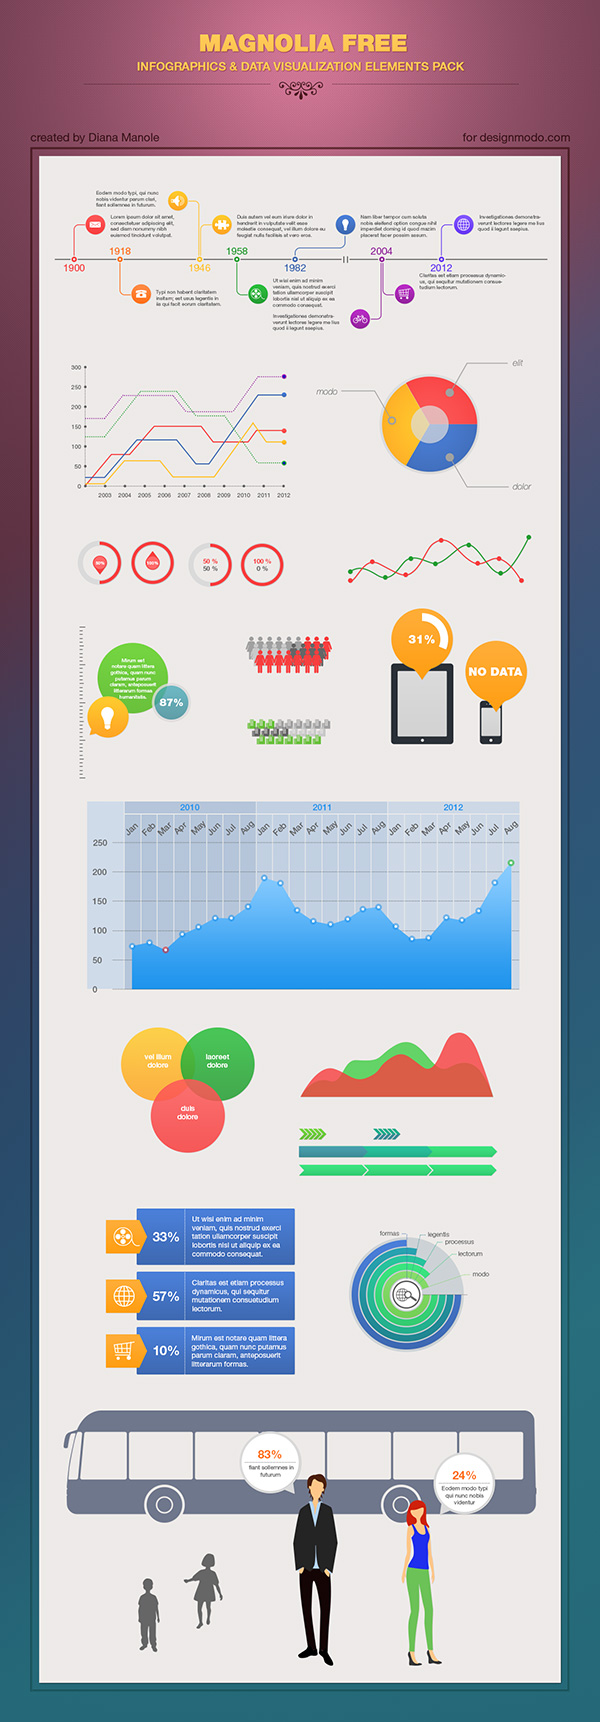 Magnolia Free – Infographic PSD Template